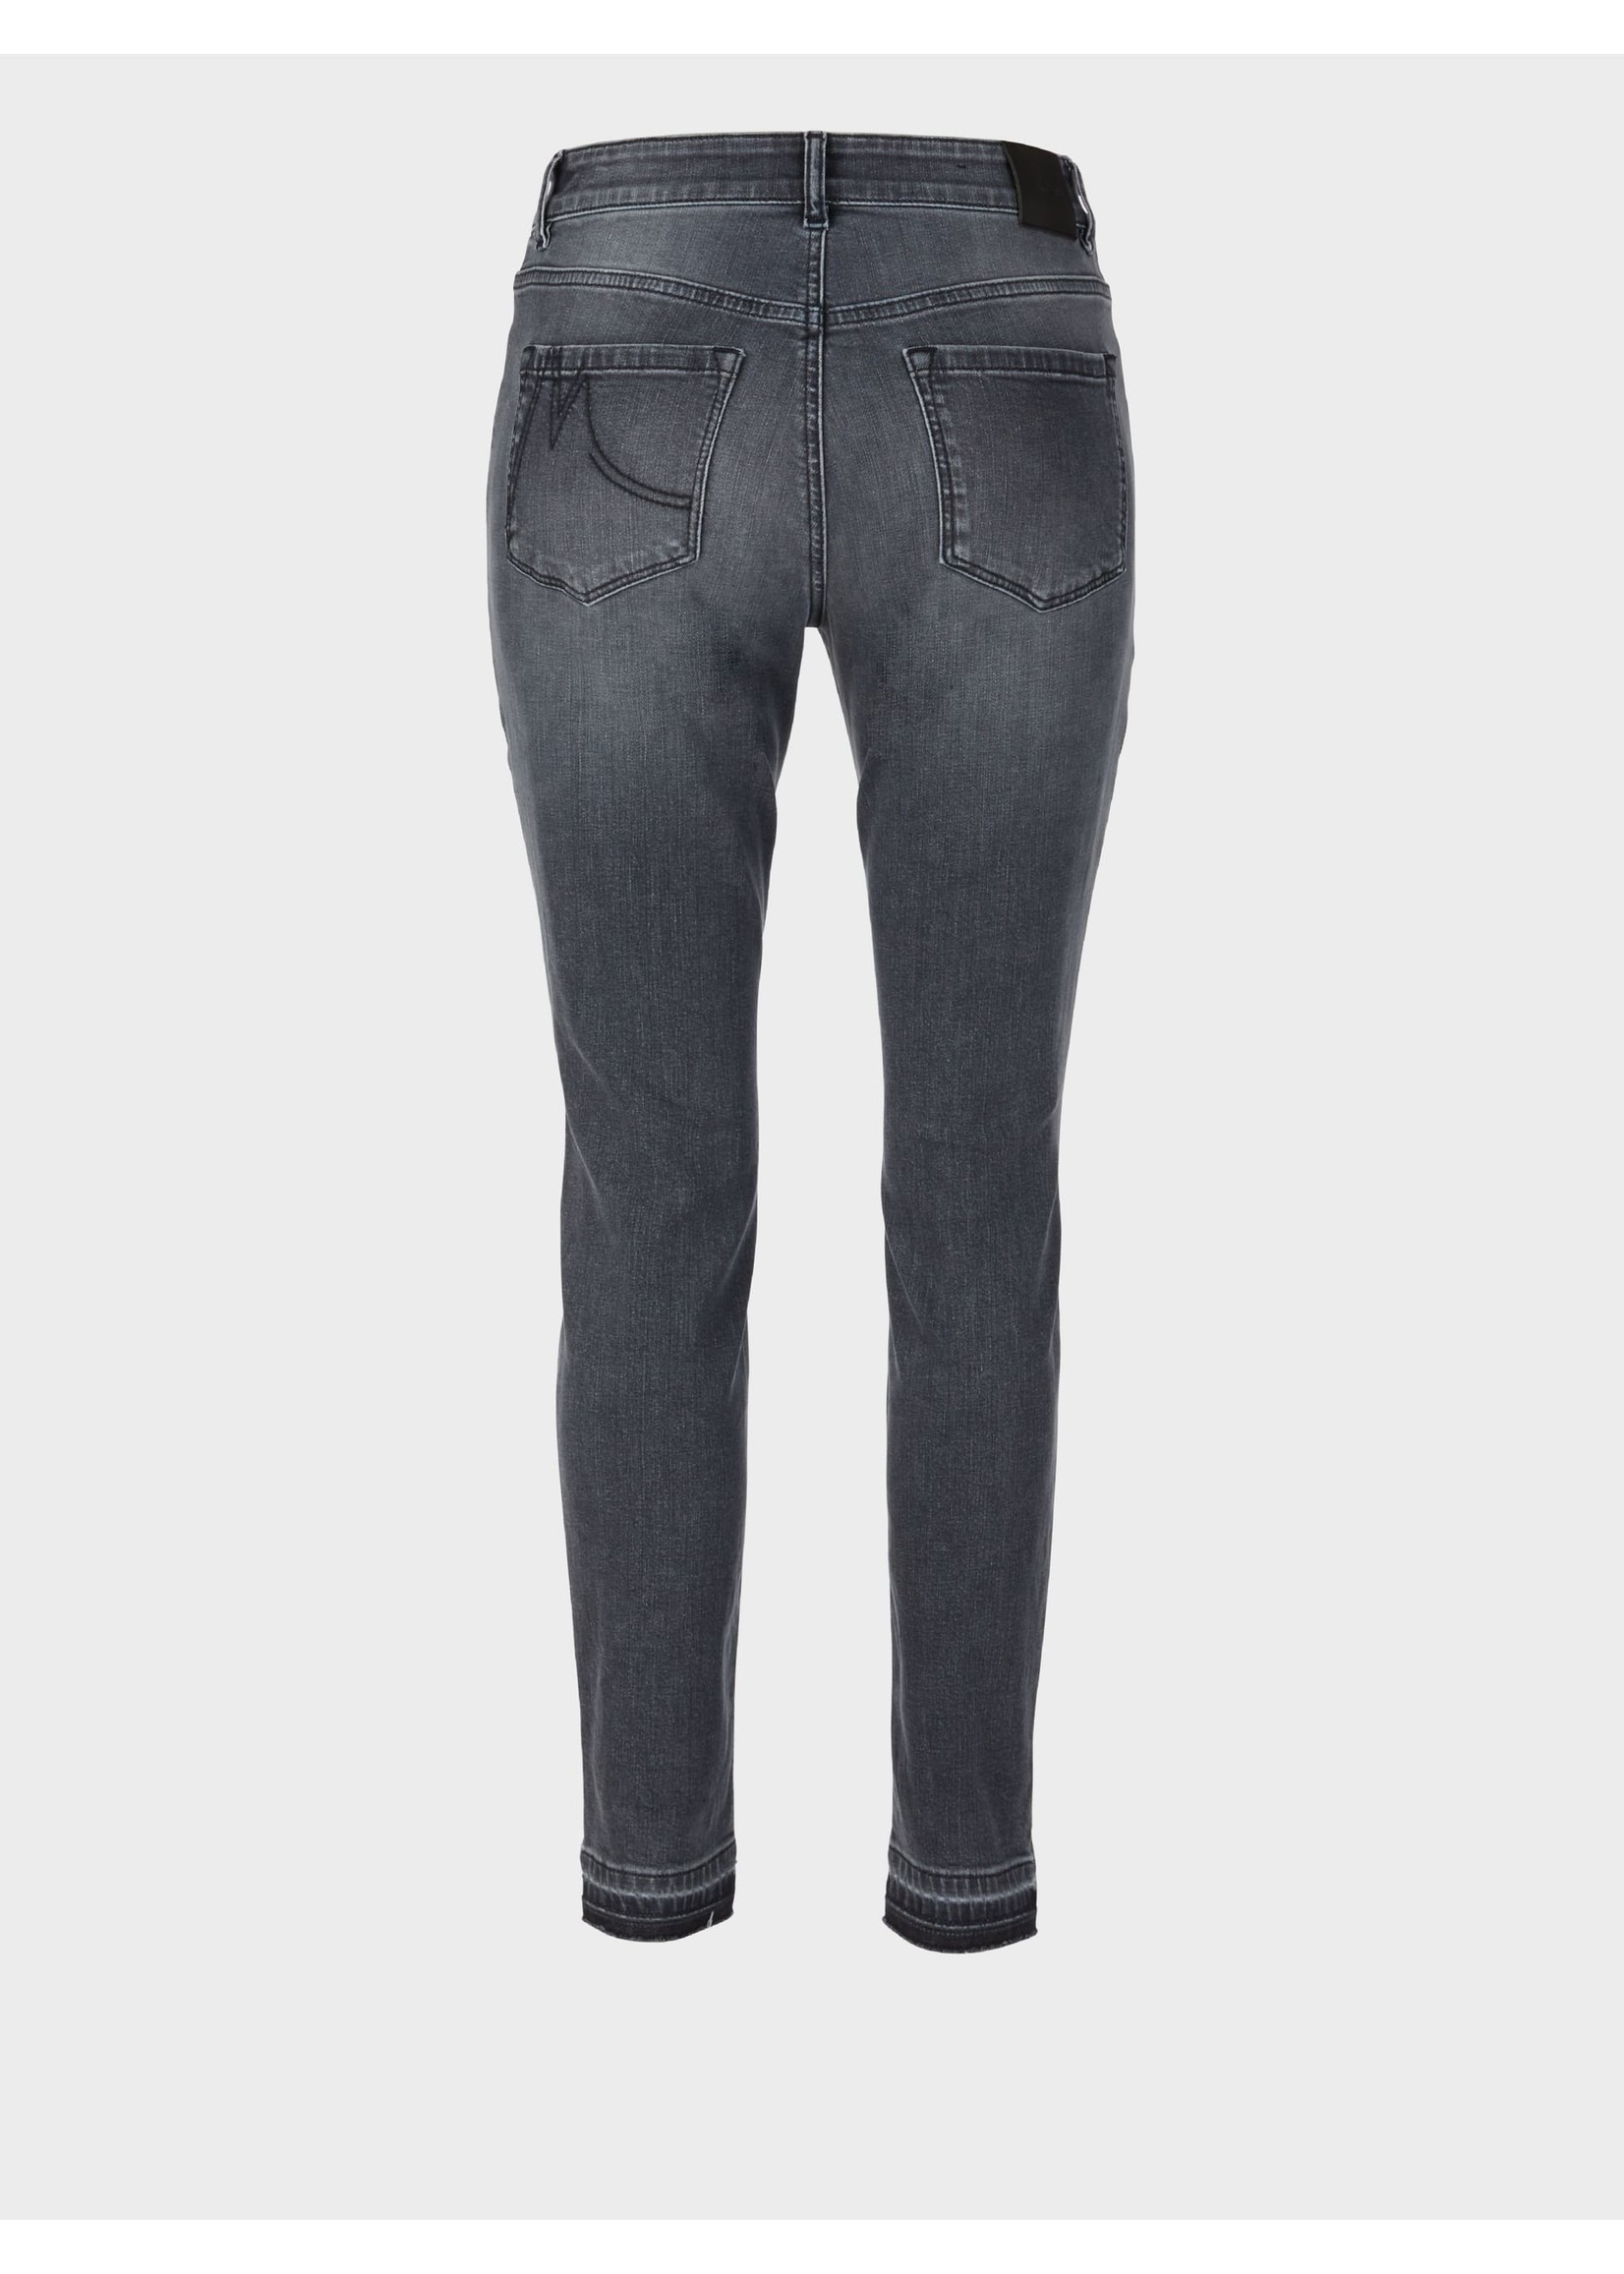 Marccain Sports Jeans US 82.11 D01 886